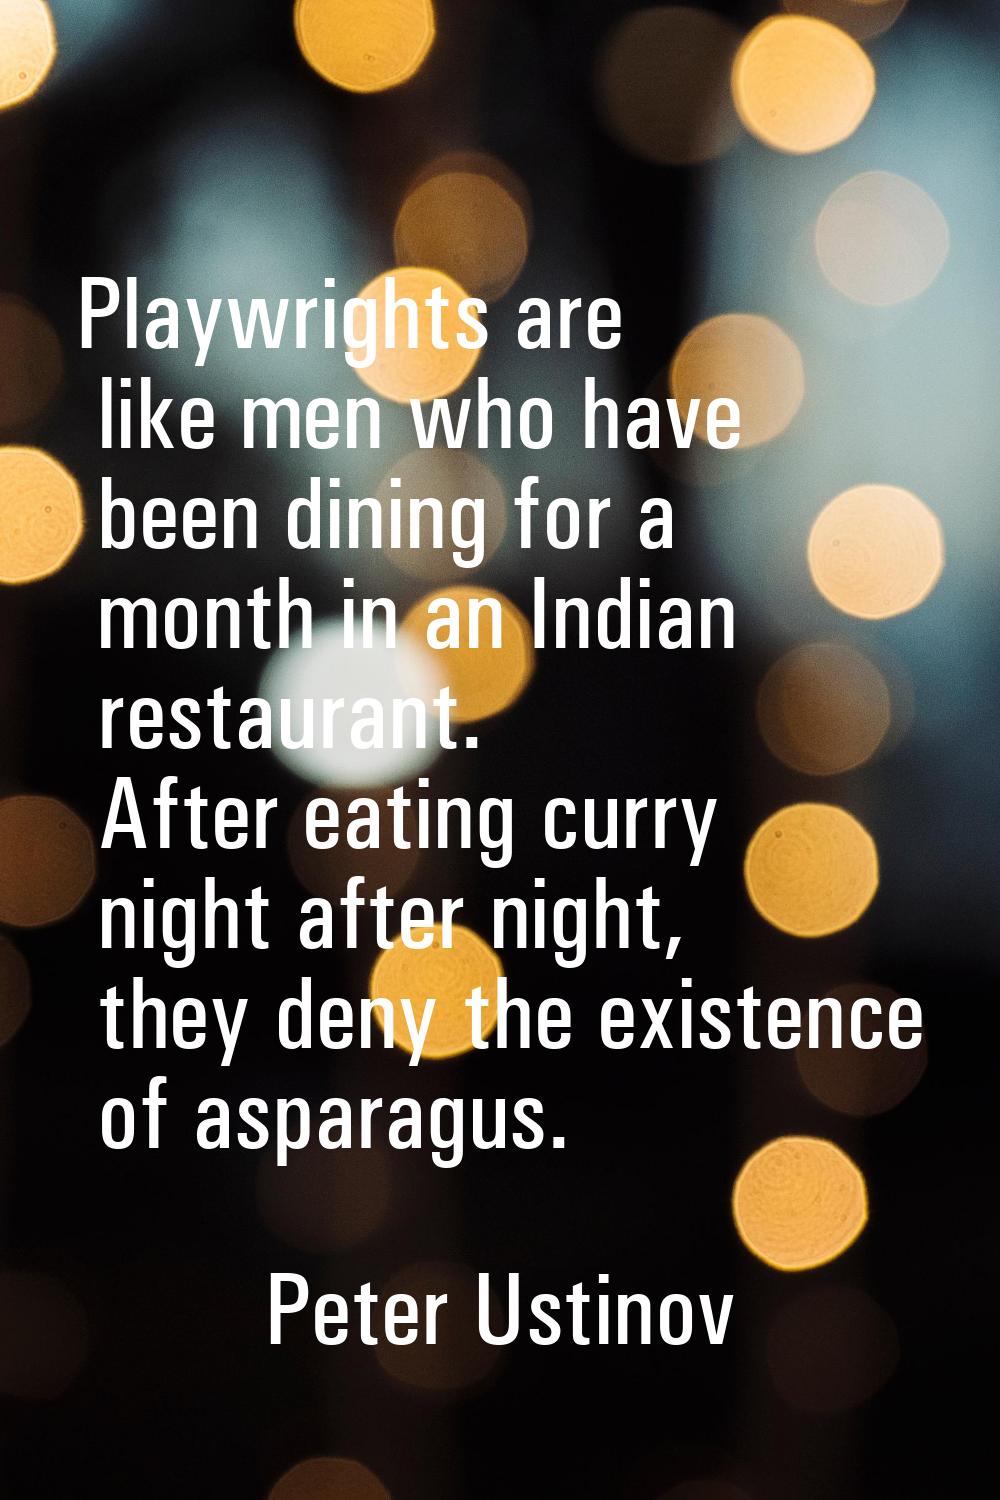 Playwrights are like men who have been dining for a month in an Indian restaurant. After eating cur